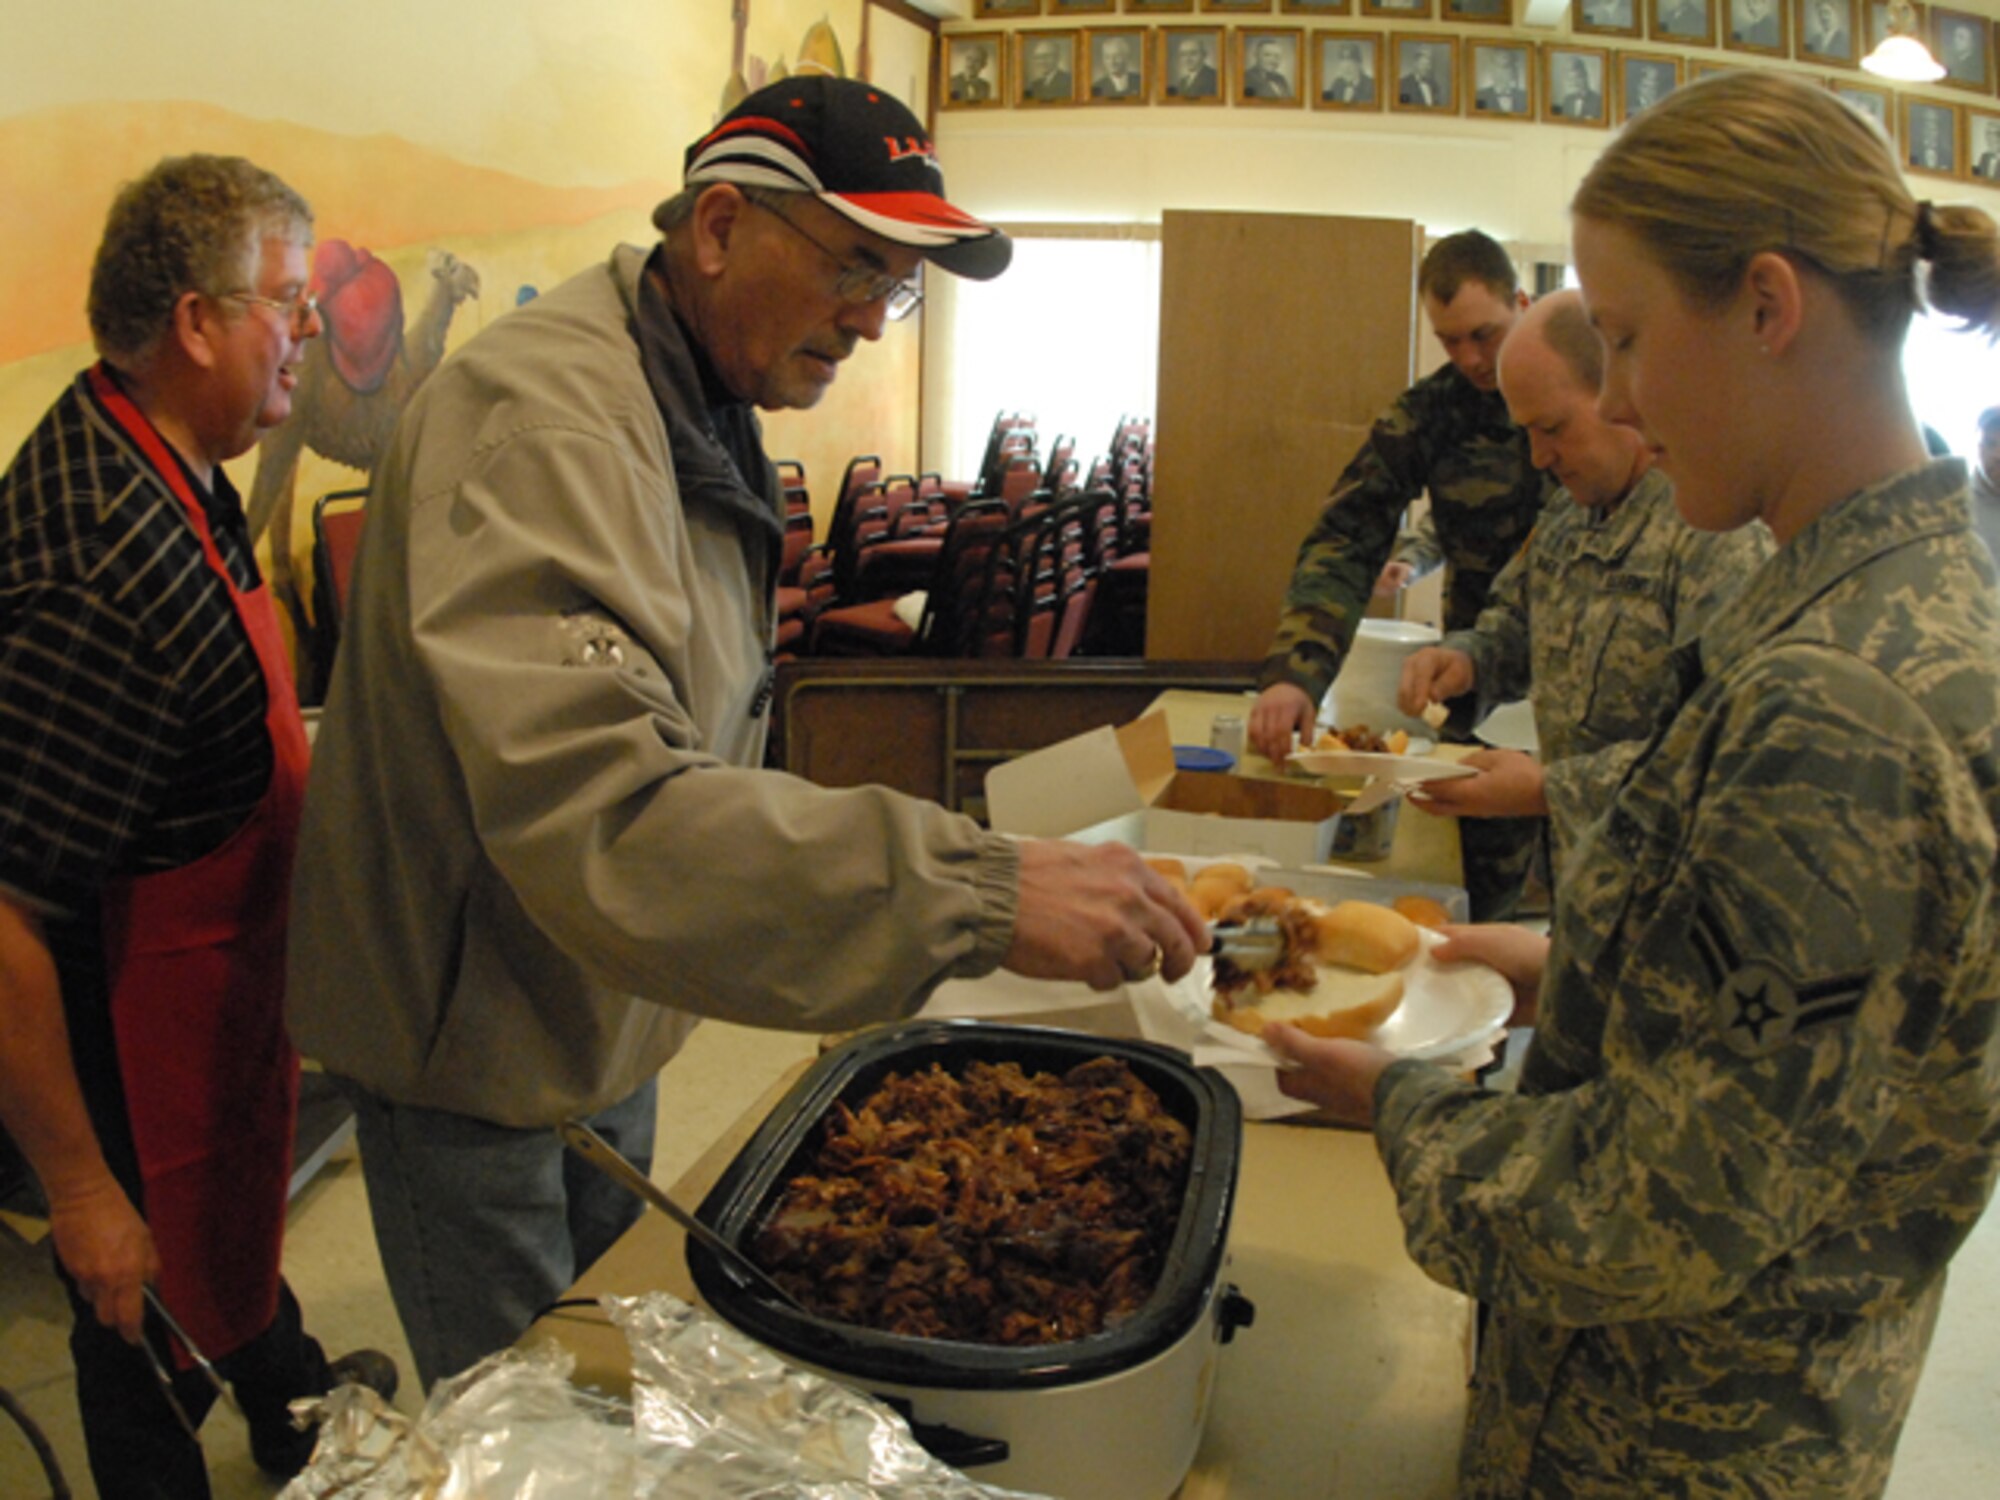 A1C Kristen E. Thomsen receives food from a Fargo Shriner while working flood operations on March 31, 2009 in Fargo, N.D.